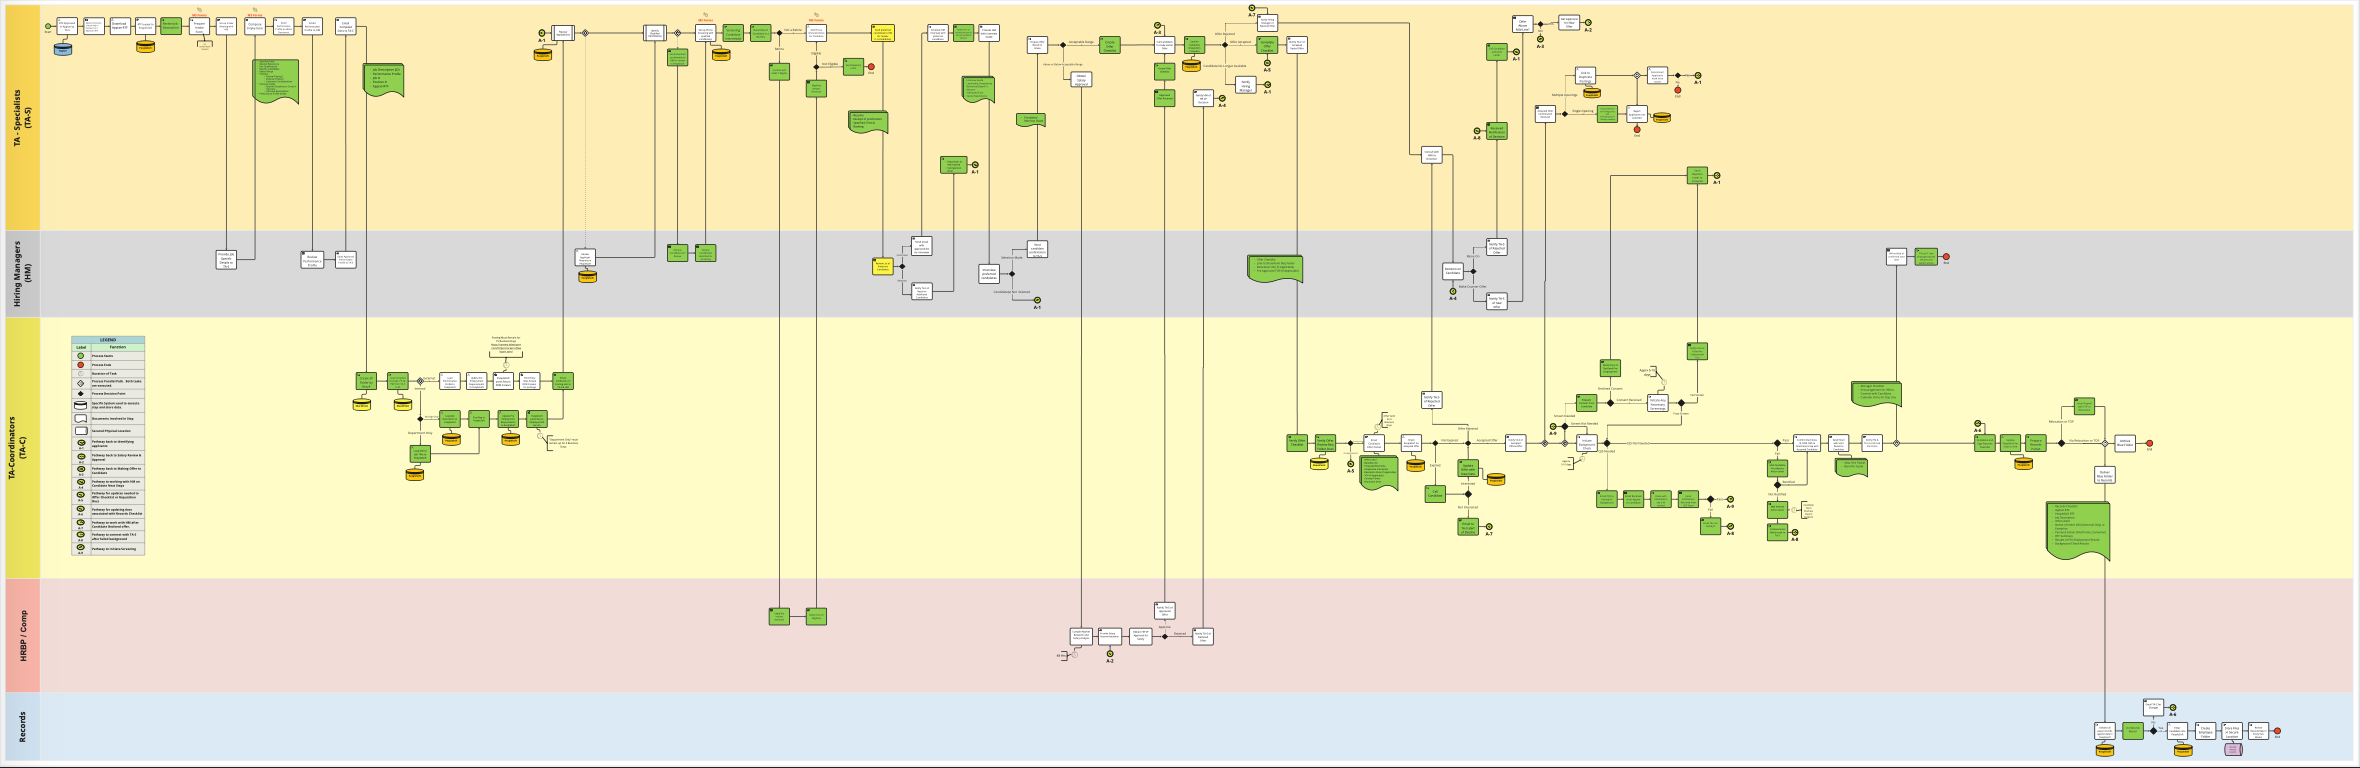 image of a process map feature four color-coded lanes with multiple elements linked together on a timeline to create a map of the current-state TA process. 